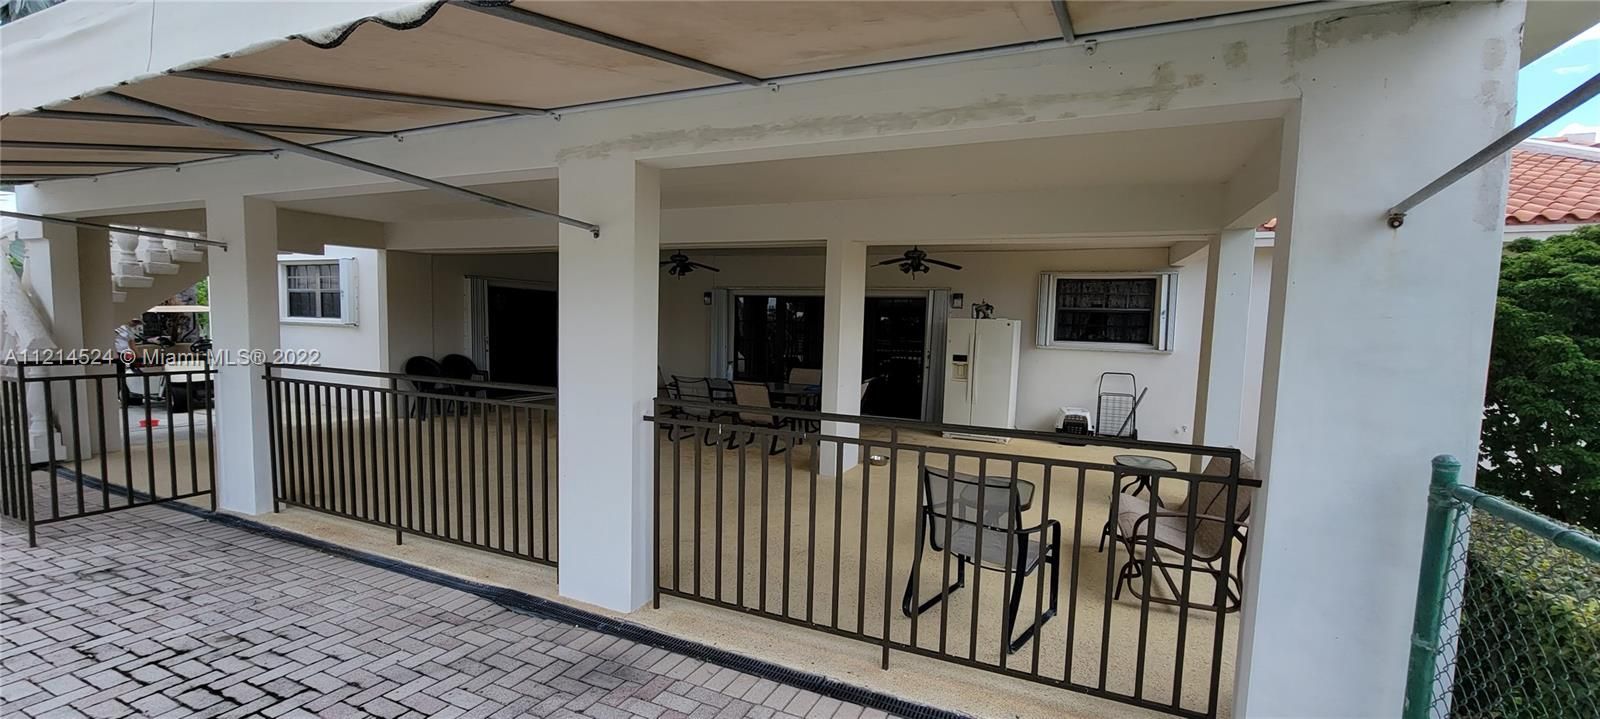 Huge covered patio with entry/exit to residence